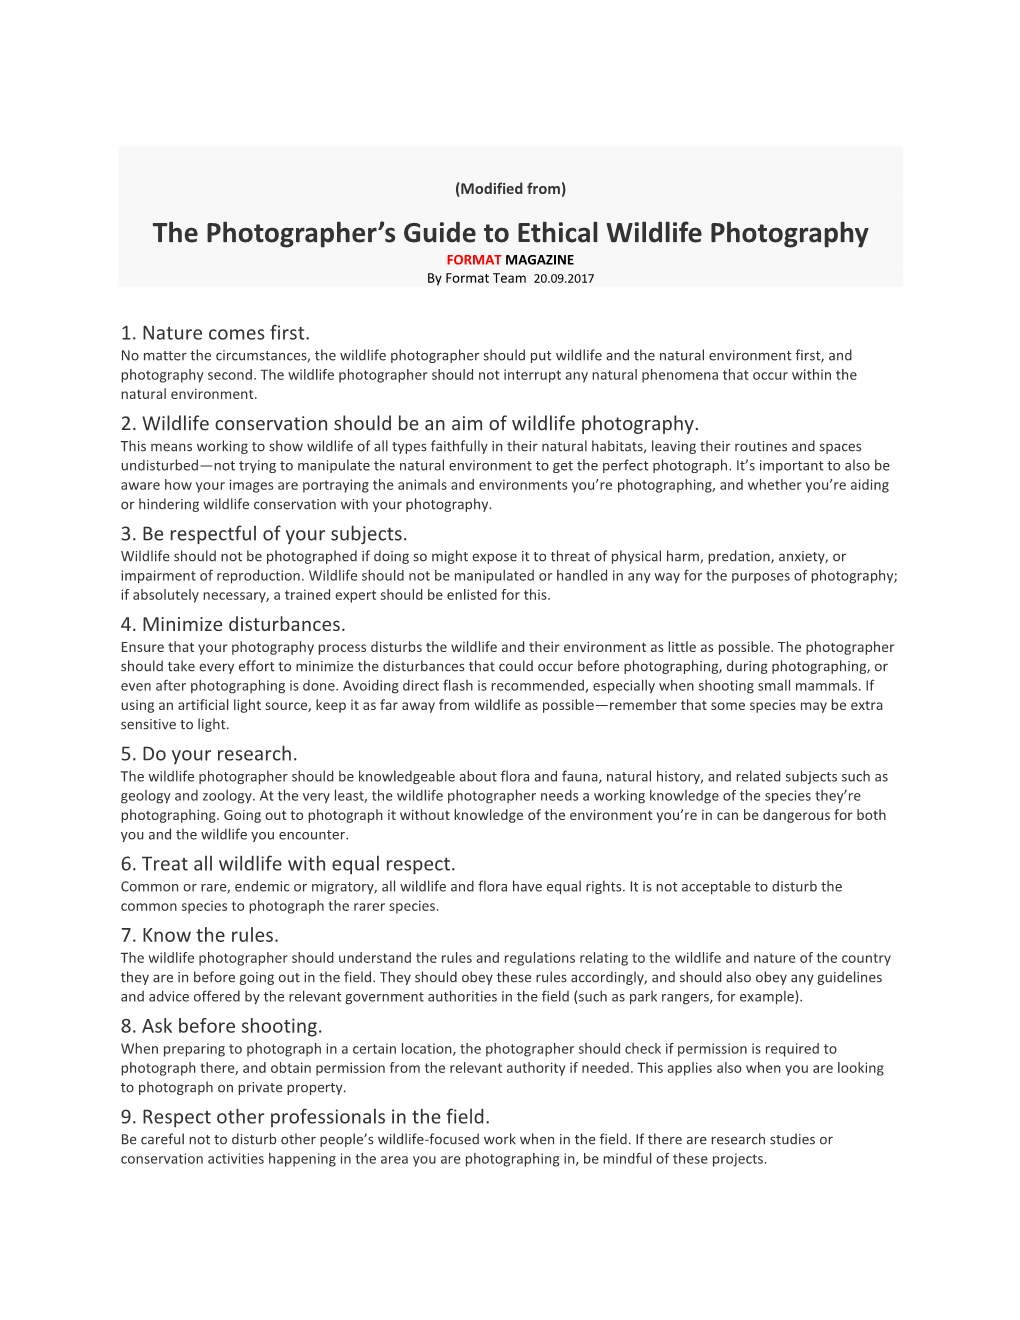 The Photographer's Guide to Ethical Wildlife Photography